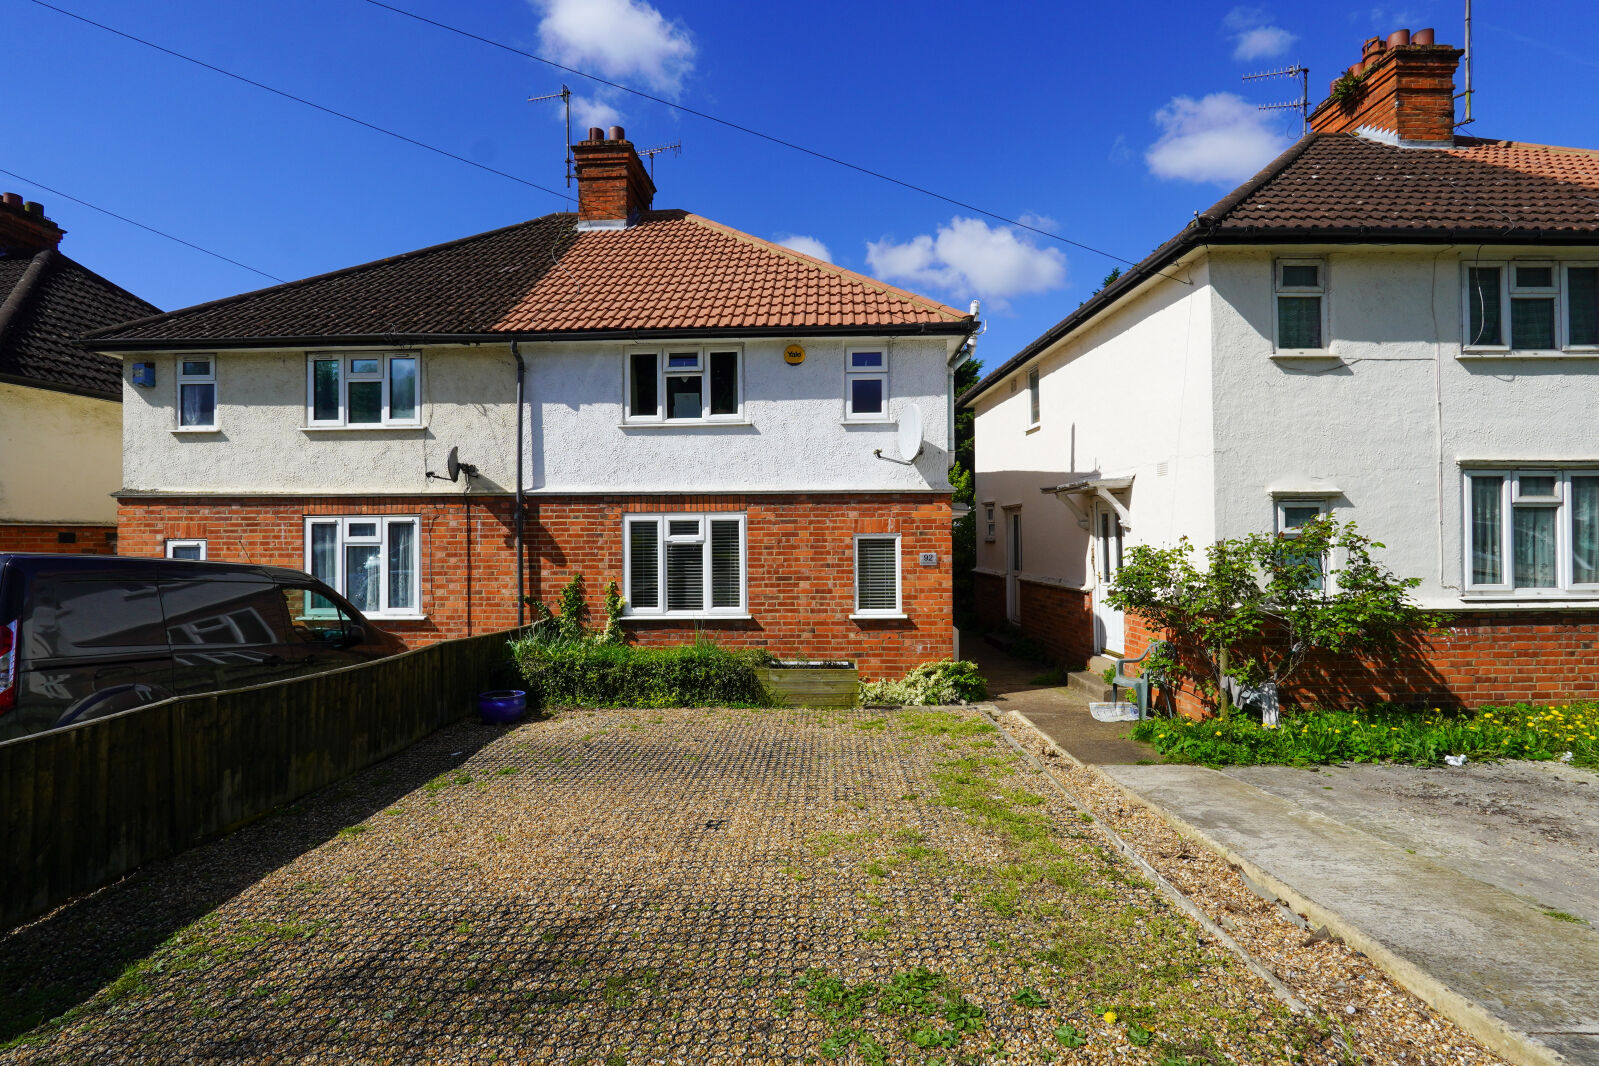 3 bedroom semi detached house for sale Bowerdean Road, High Wycombe, HP13, main image